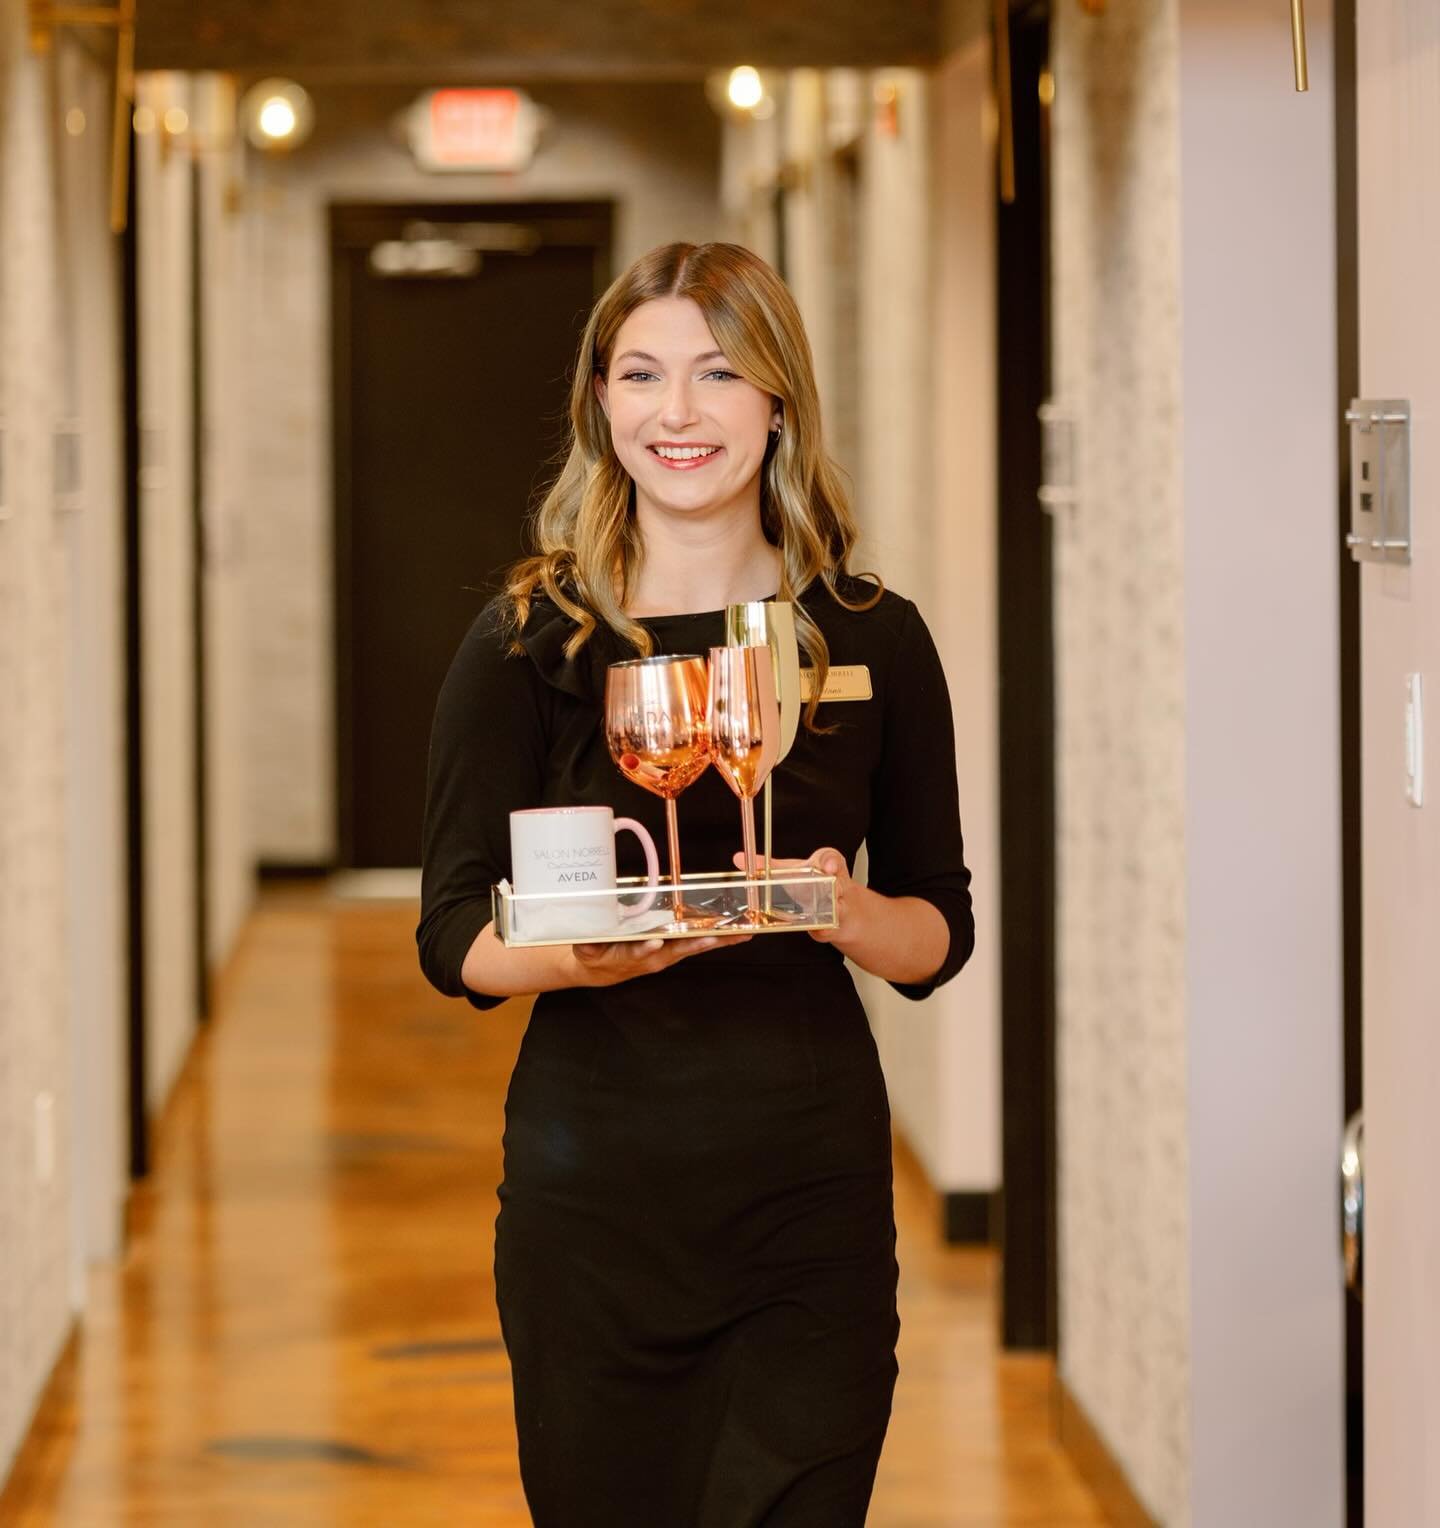 Our sweet concierge, Melana welcomes our guests with open arms. That&rsquo;s the Salon Norrell difference, we believe in creating an environment where our whole team serves you. From the moment you make your reservation to our service follow-up - our